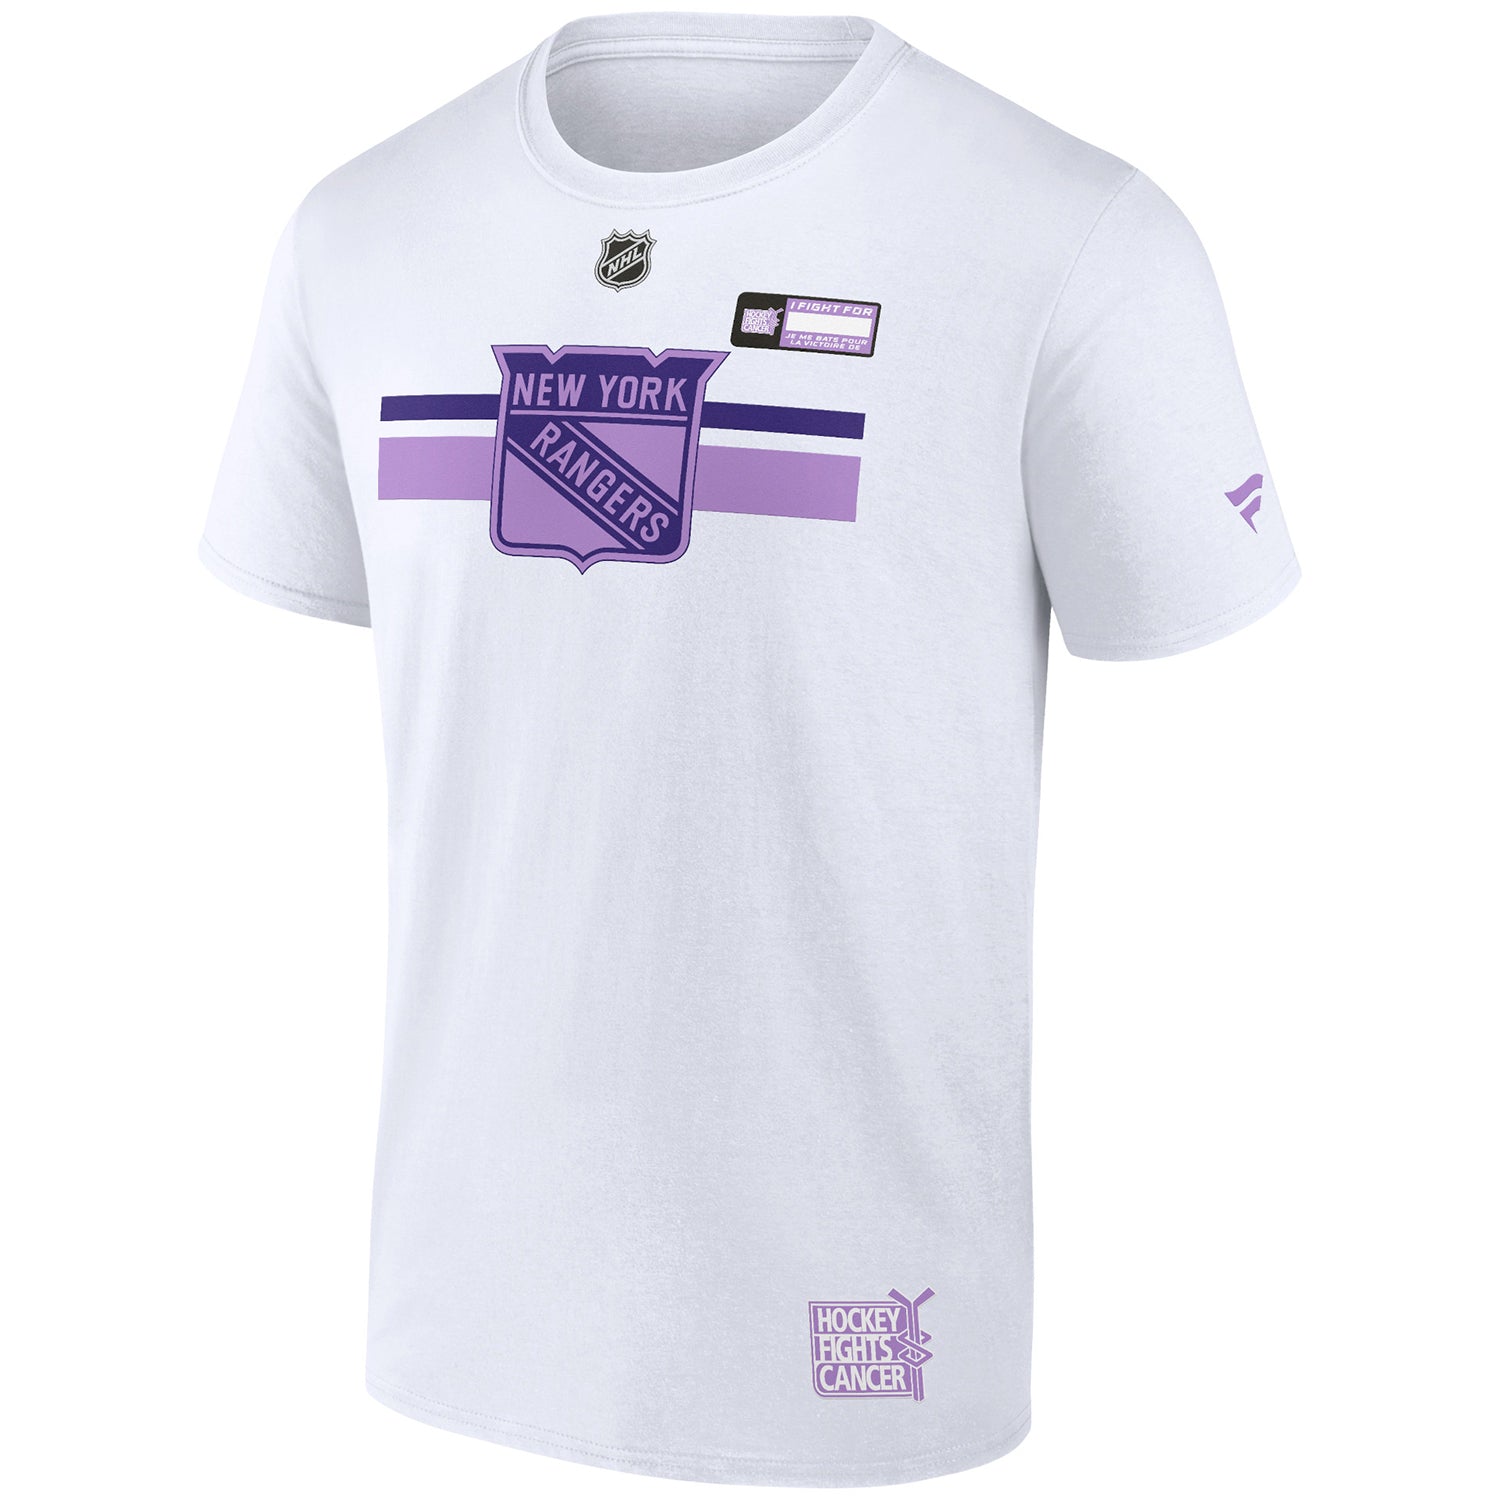 NHL Hockey Fights Cancer, Collection, NHL Hockey Fights Cancer